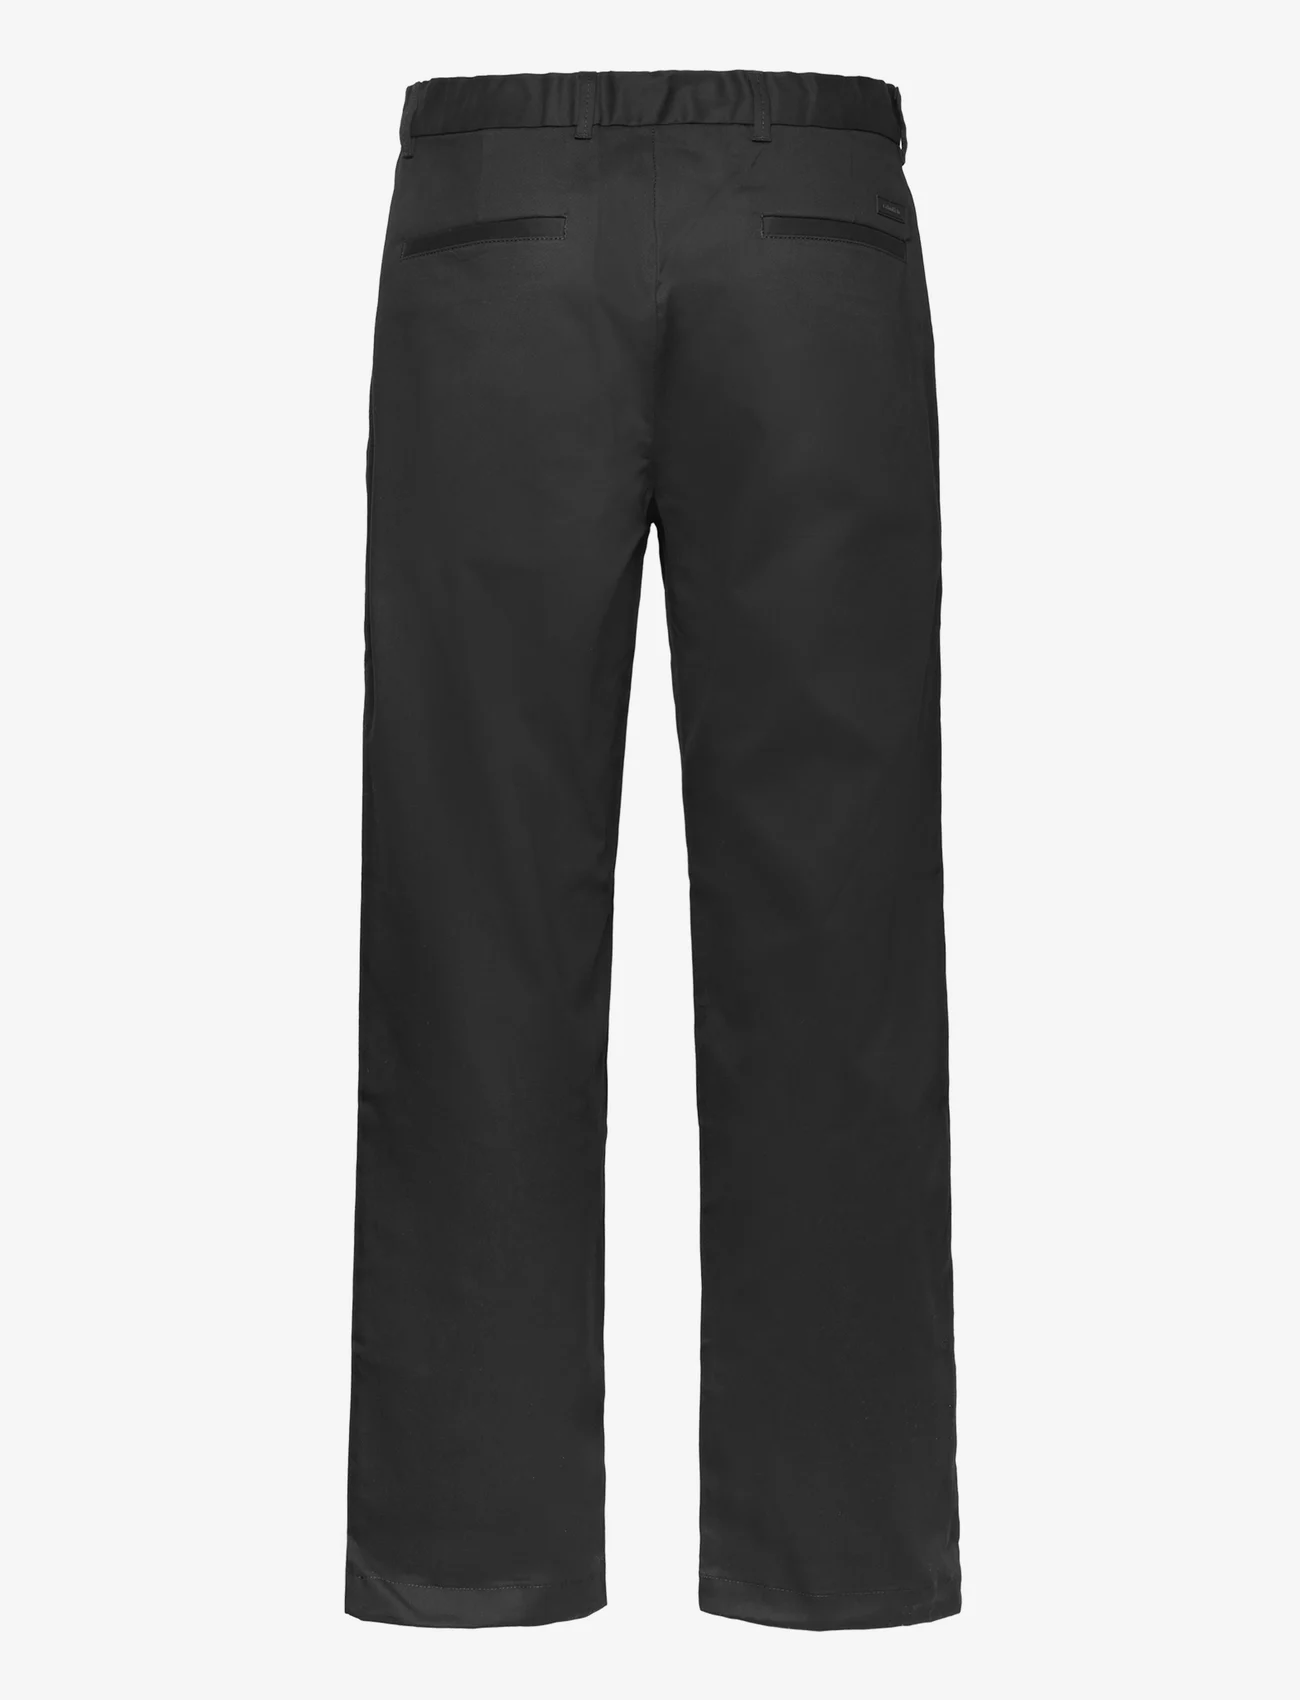 Calvin Klein - MODERN TWILL RELAXED PANTS - chino's - ck black - 1